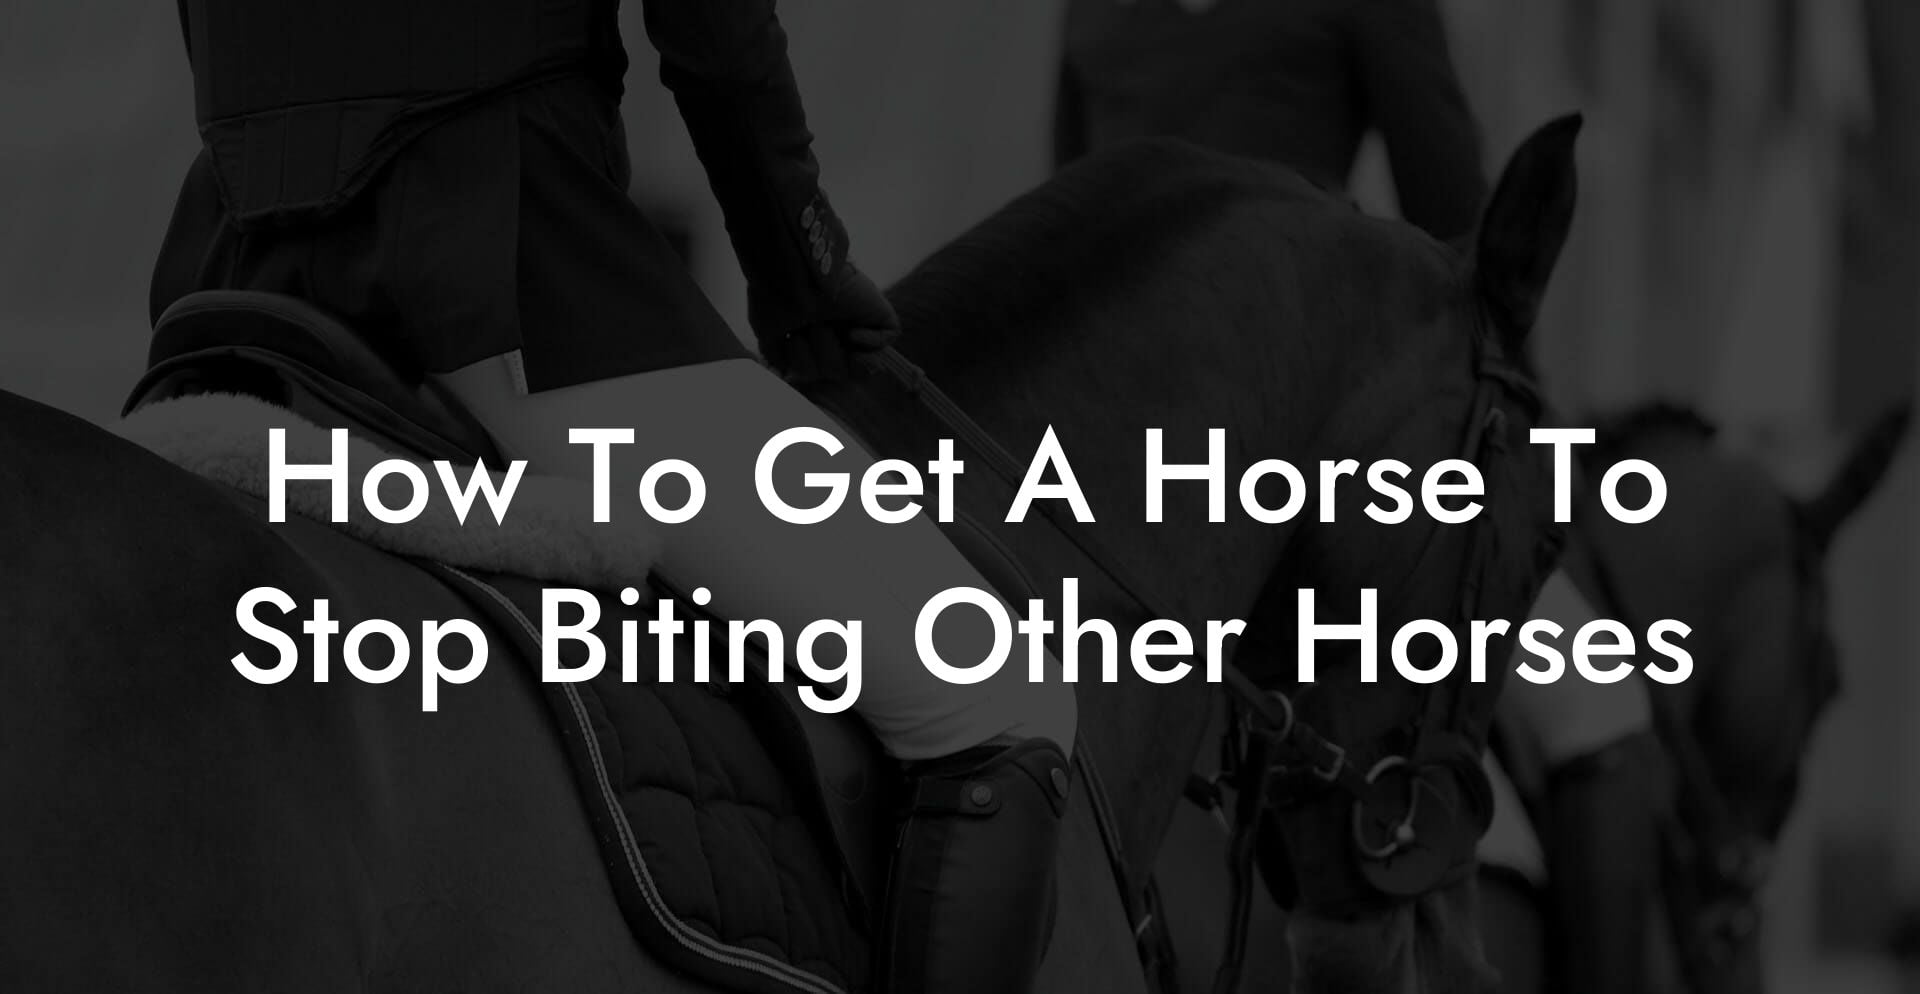 How To Get A Horse To Stop Biting Other Horses